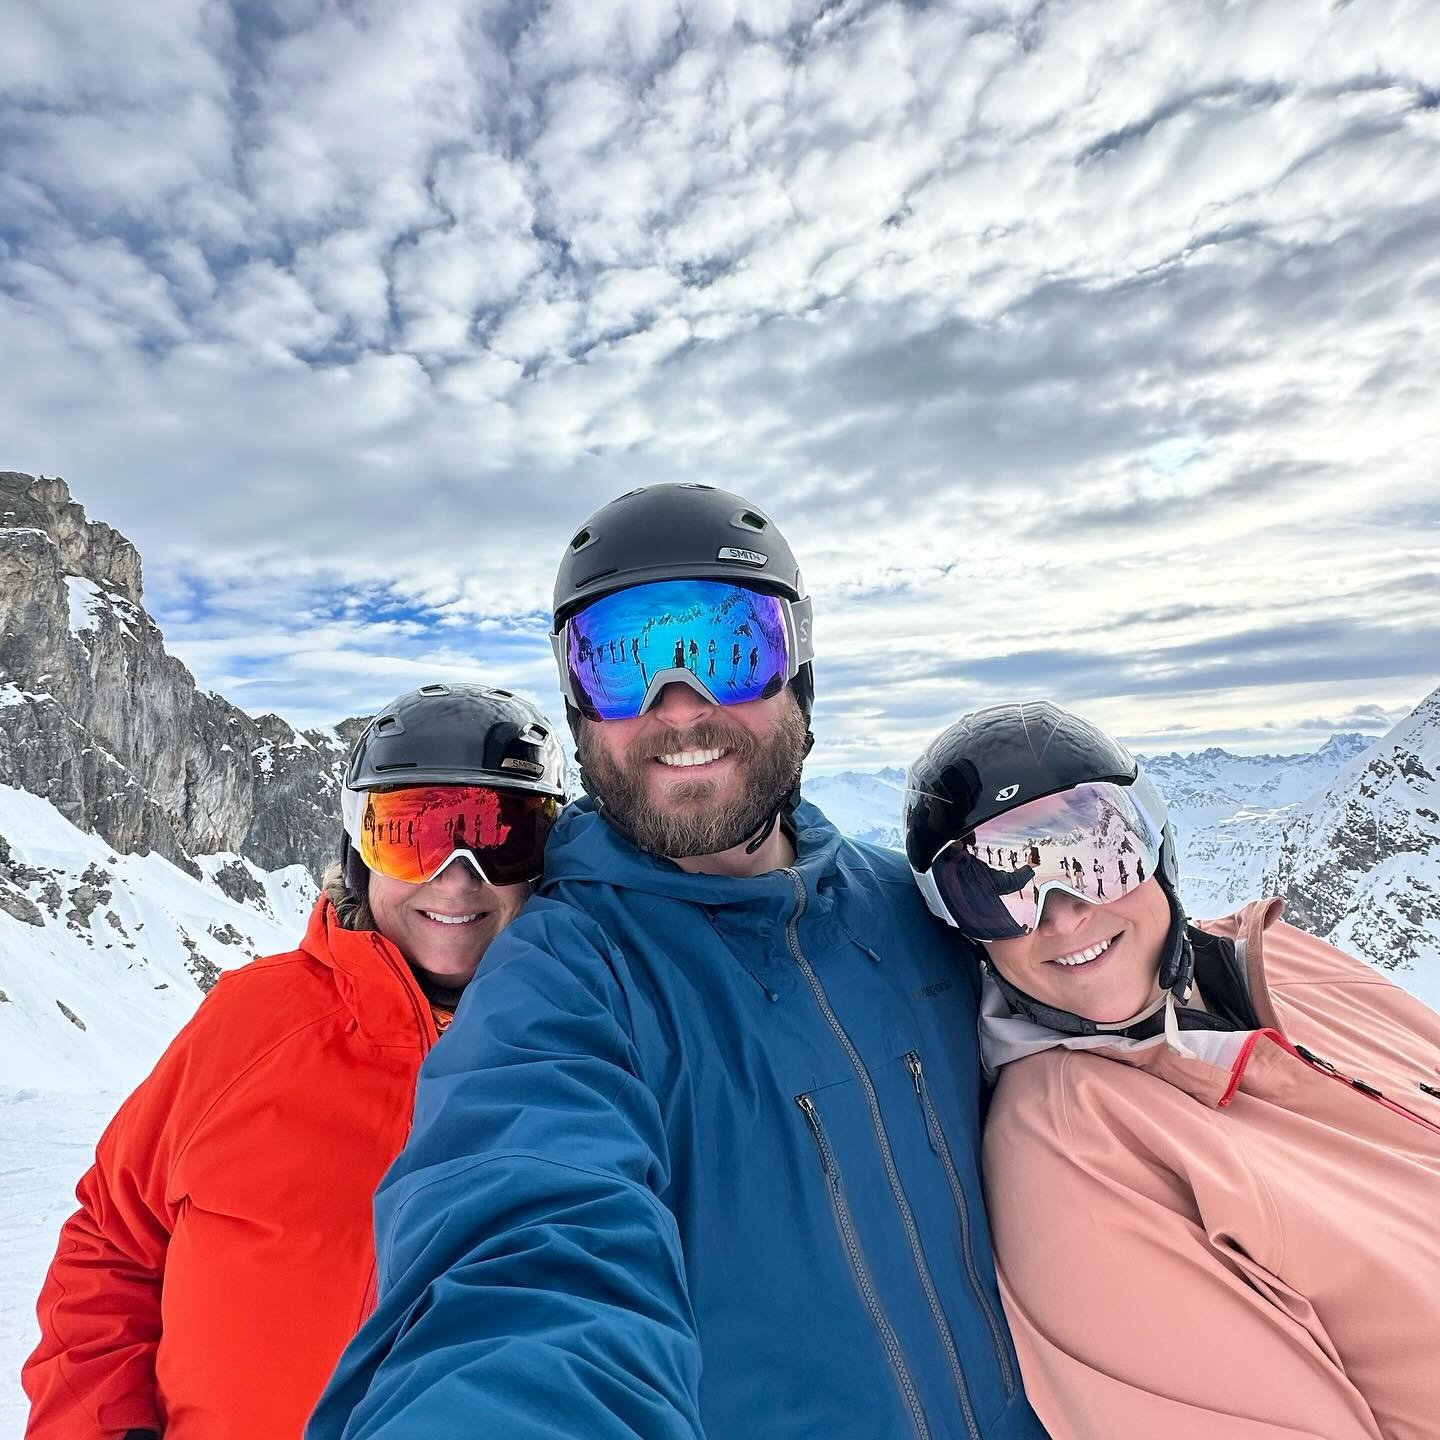 The ski season disappeared so quickly and it wasn&rsquo;t as full of mountains as I had hoped, but great times were had. Especially in Austria celebrating my mom&rsquo;s 60th birthday. Some thing change, but Lech stays the same.